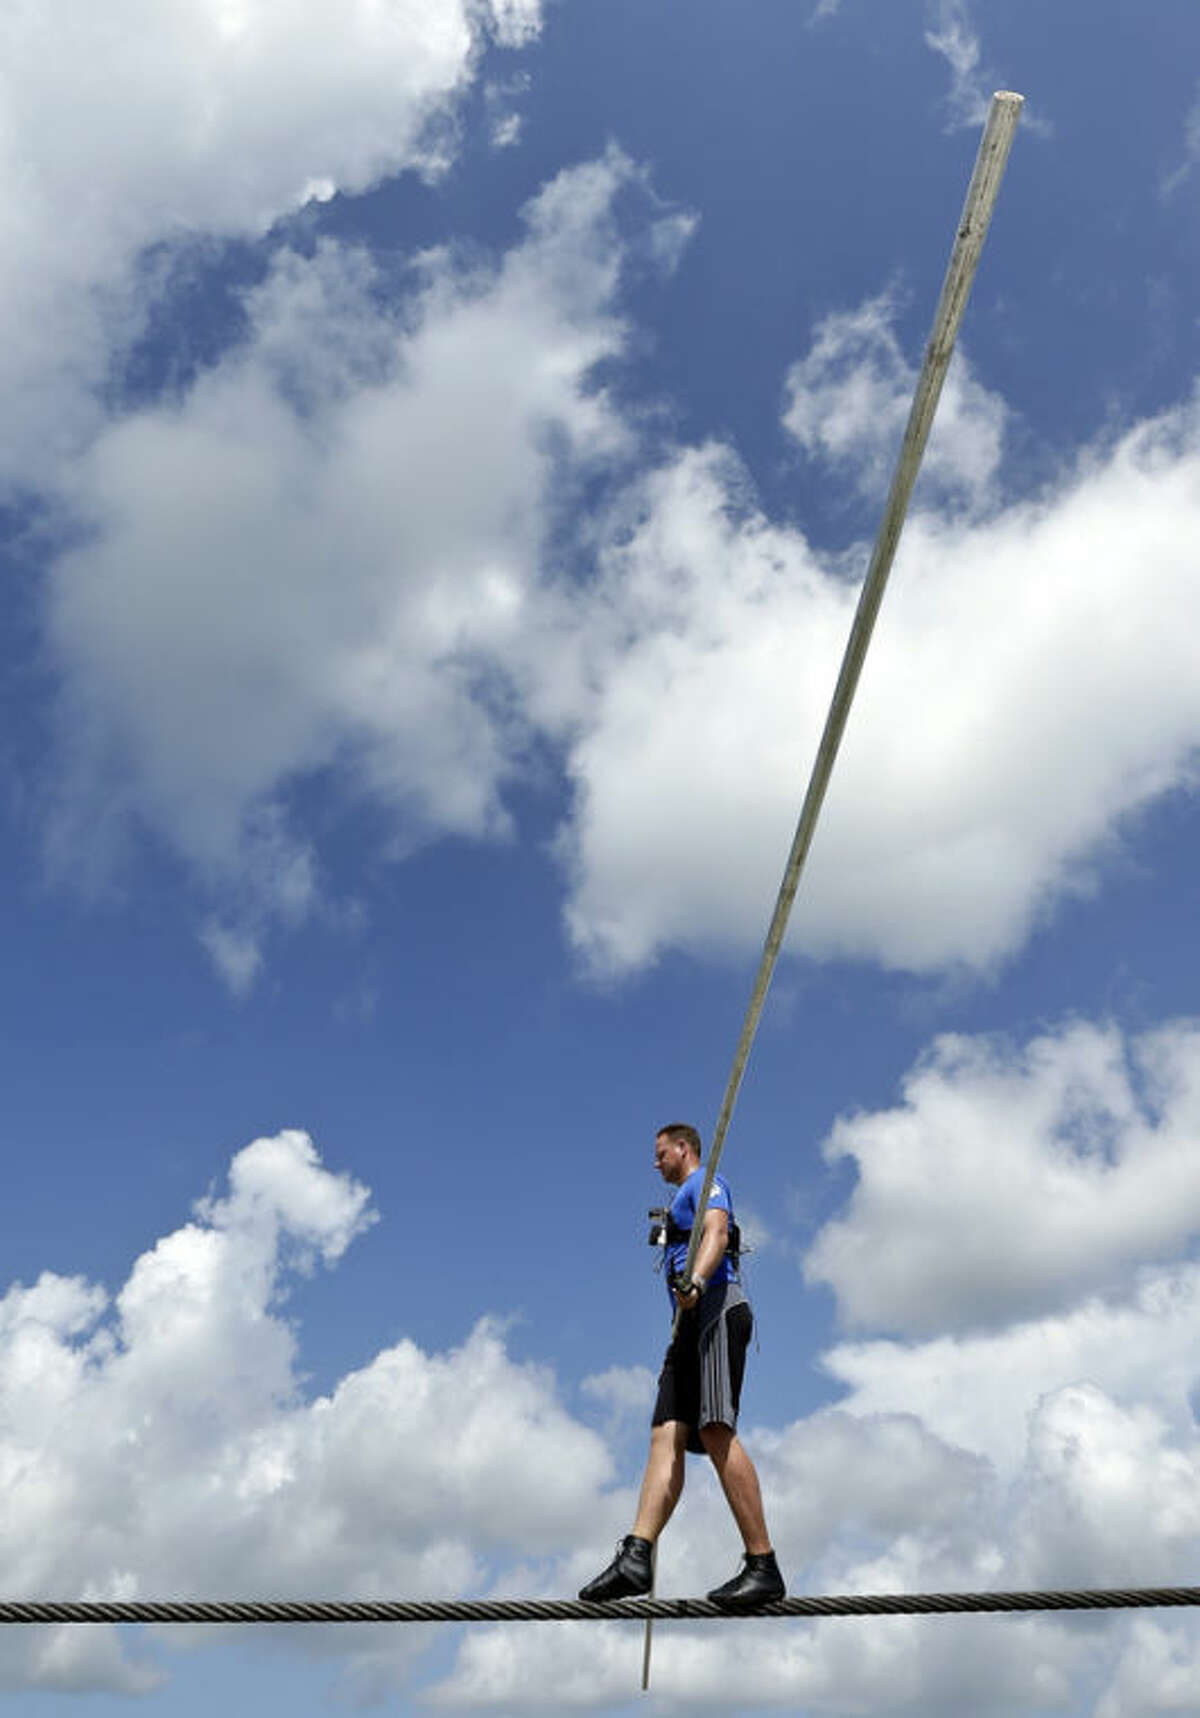 High wire performer Nik Wallenda walks across a wire as he practices Tuesday, June 18, 2013 in Sarasota, Fla. Wallenda, a seventh generation high-wire walker, will attempt to walk across the Grand Canyon on Sunday, June 23, 2013. (AP Photo/Chris O'Meara)